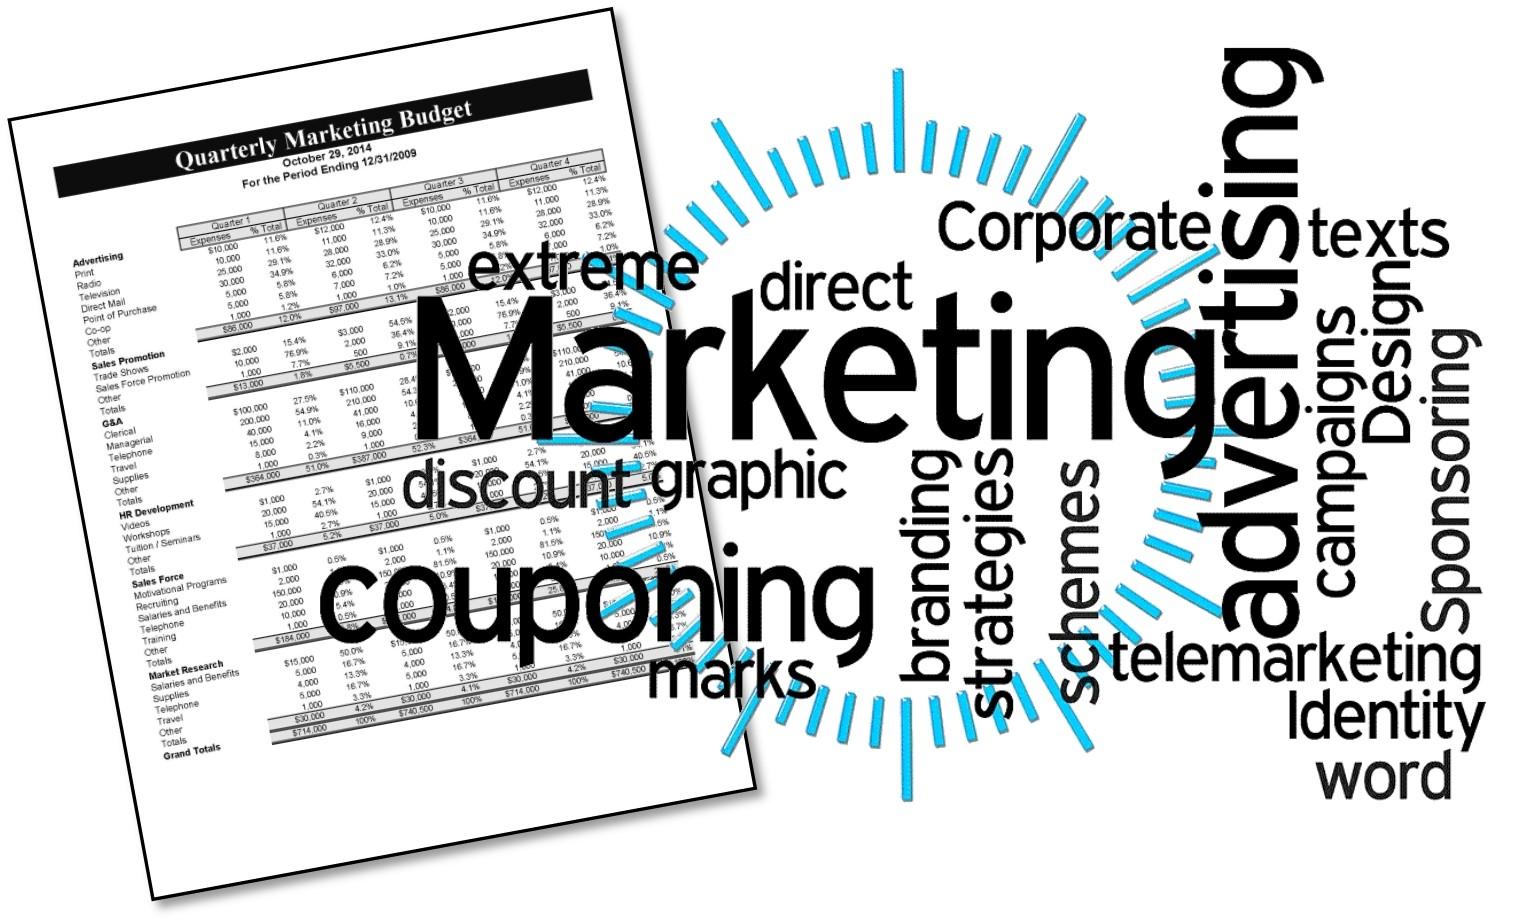 Spreadsheet with graphic containing marketing terms